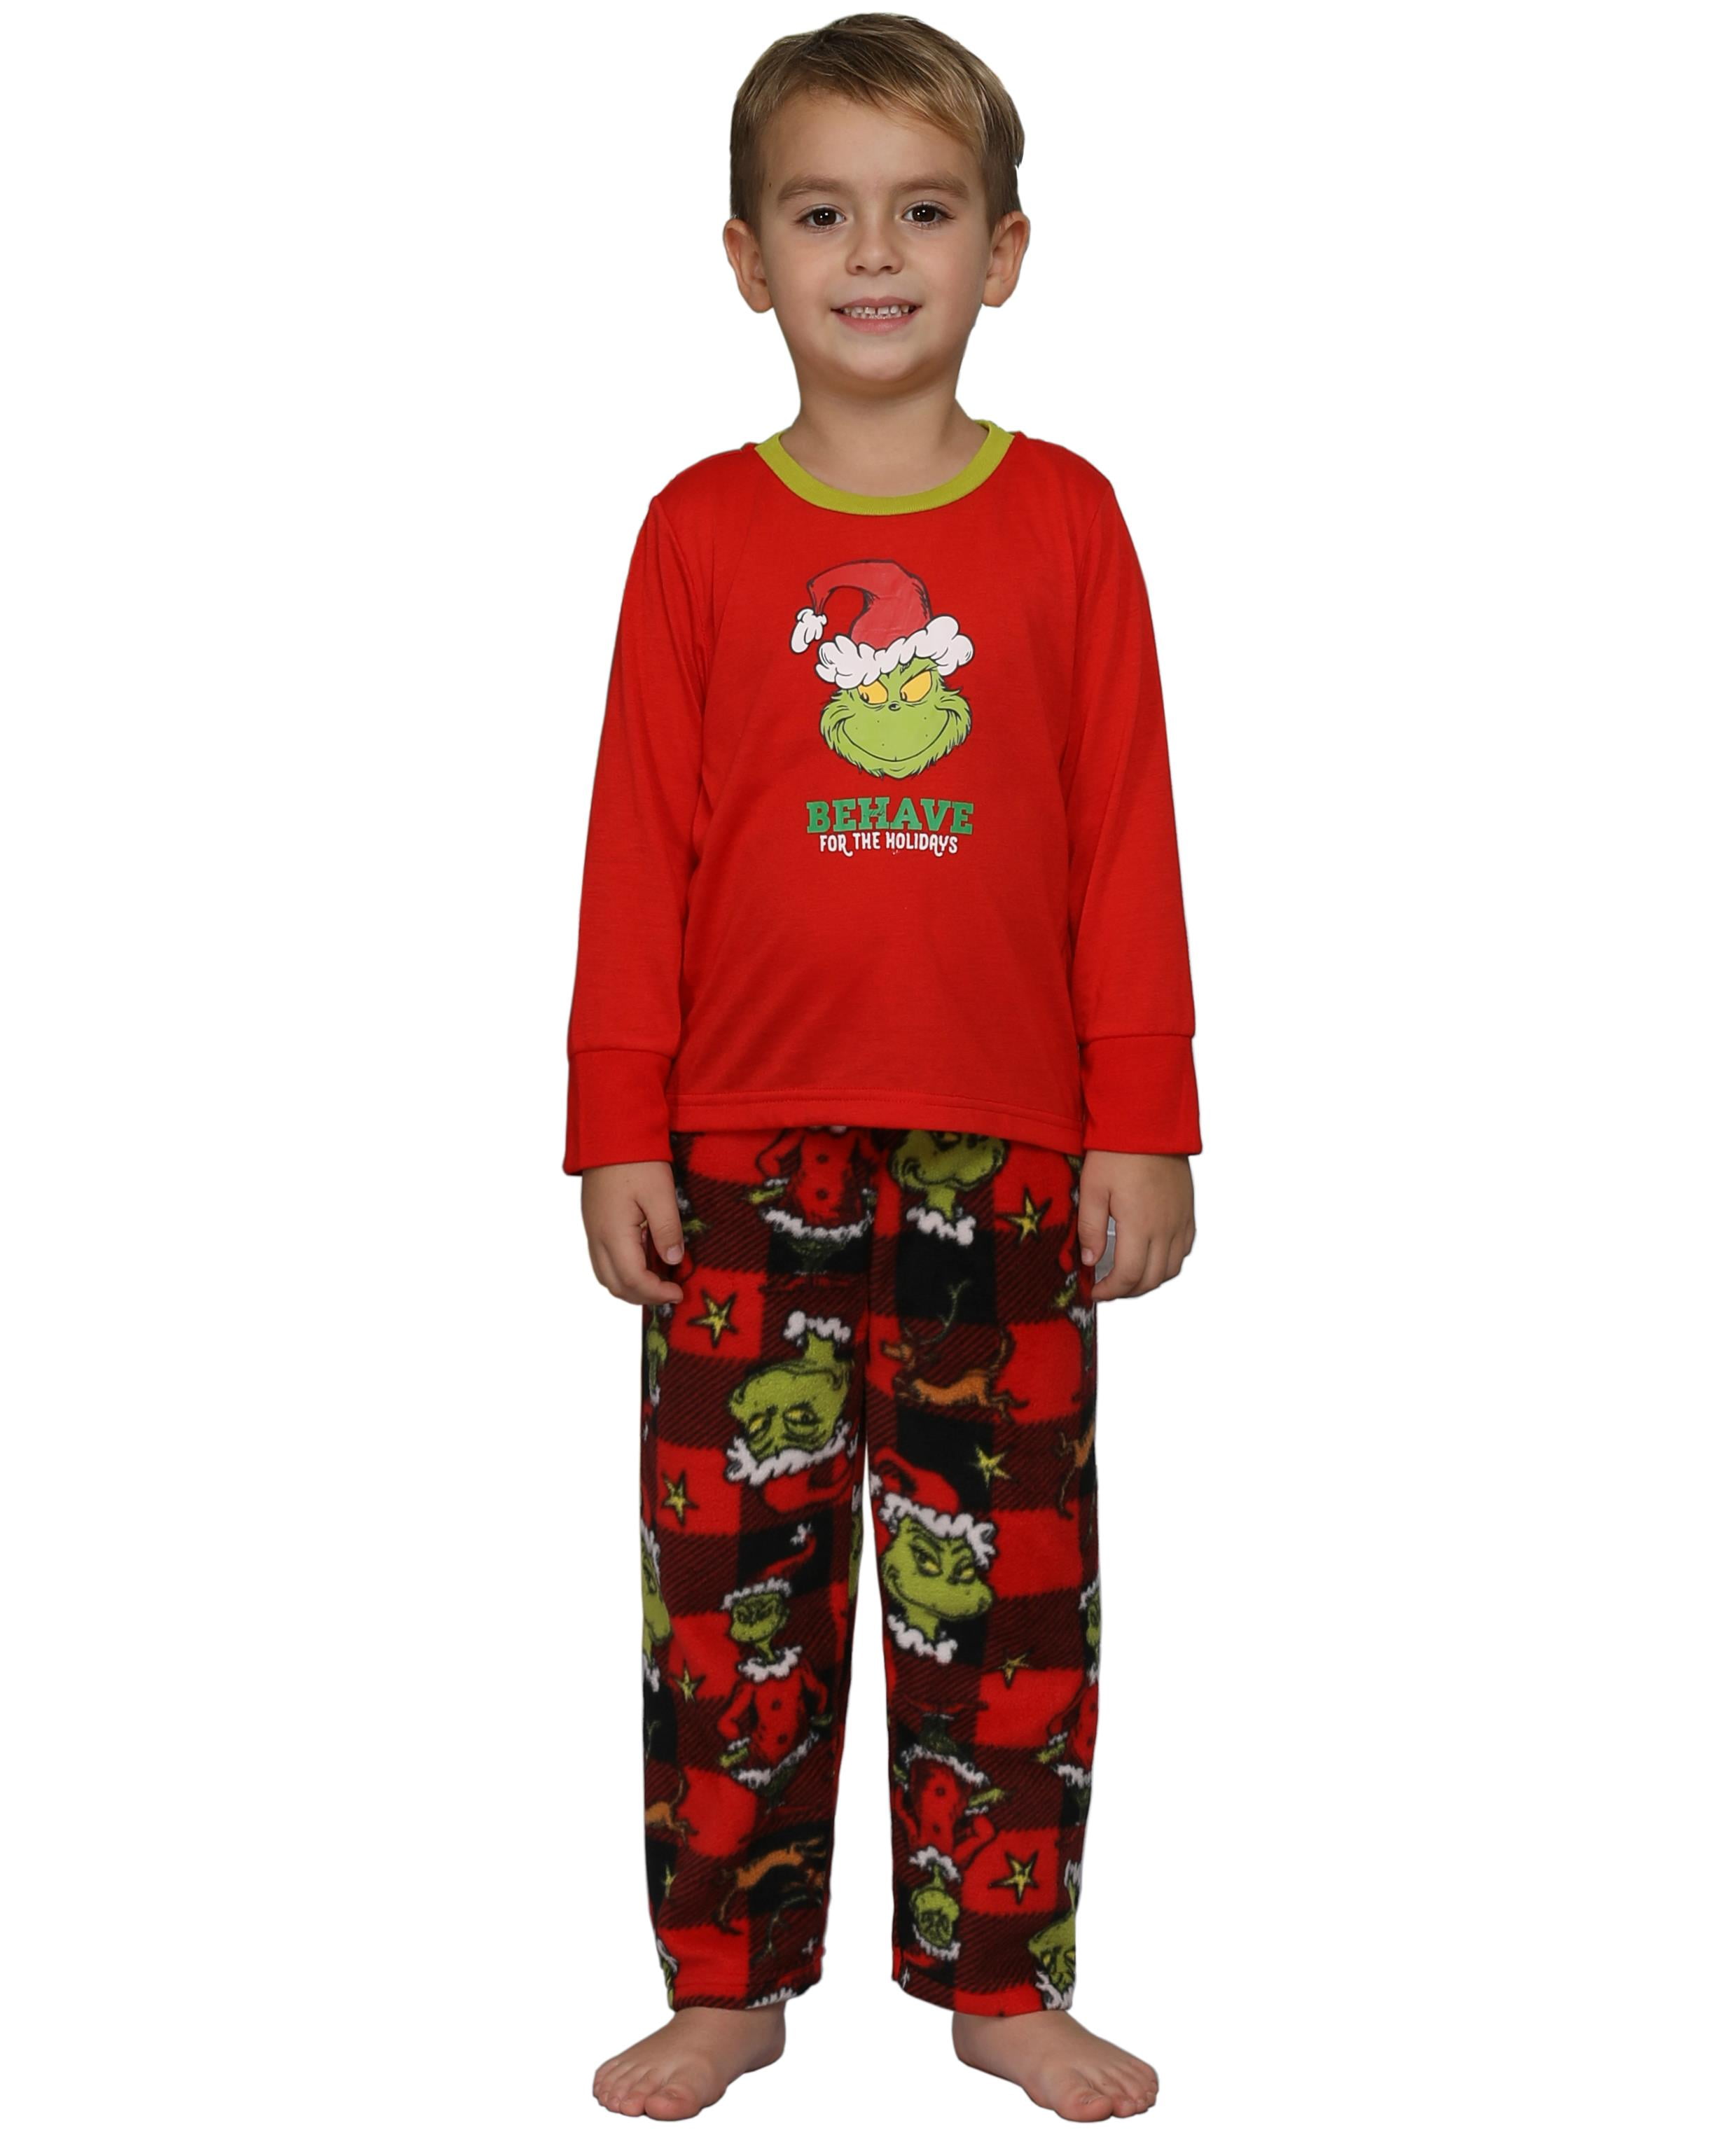 NEW Boutique Grinch Stole Christmas Dr Seuss Boys Girls Pajamas Nightgown 